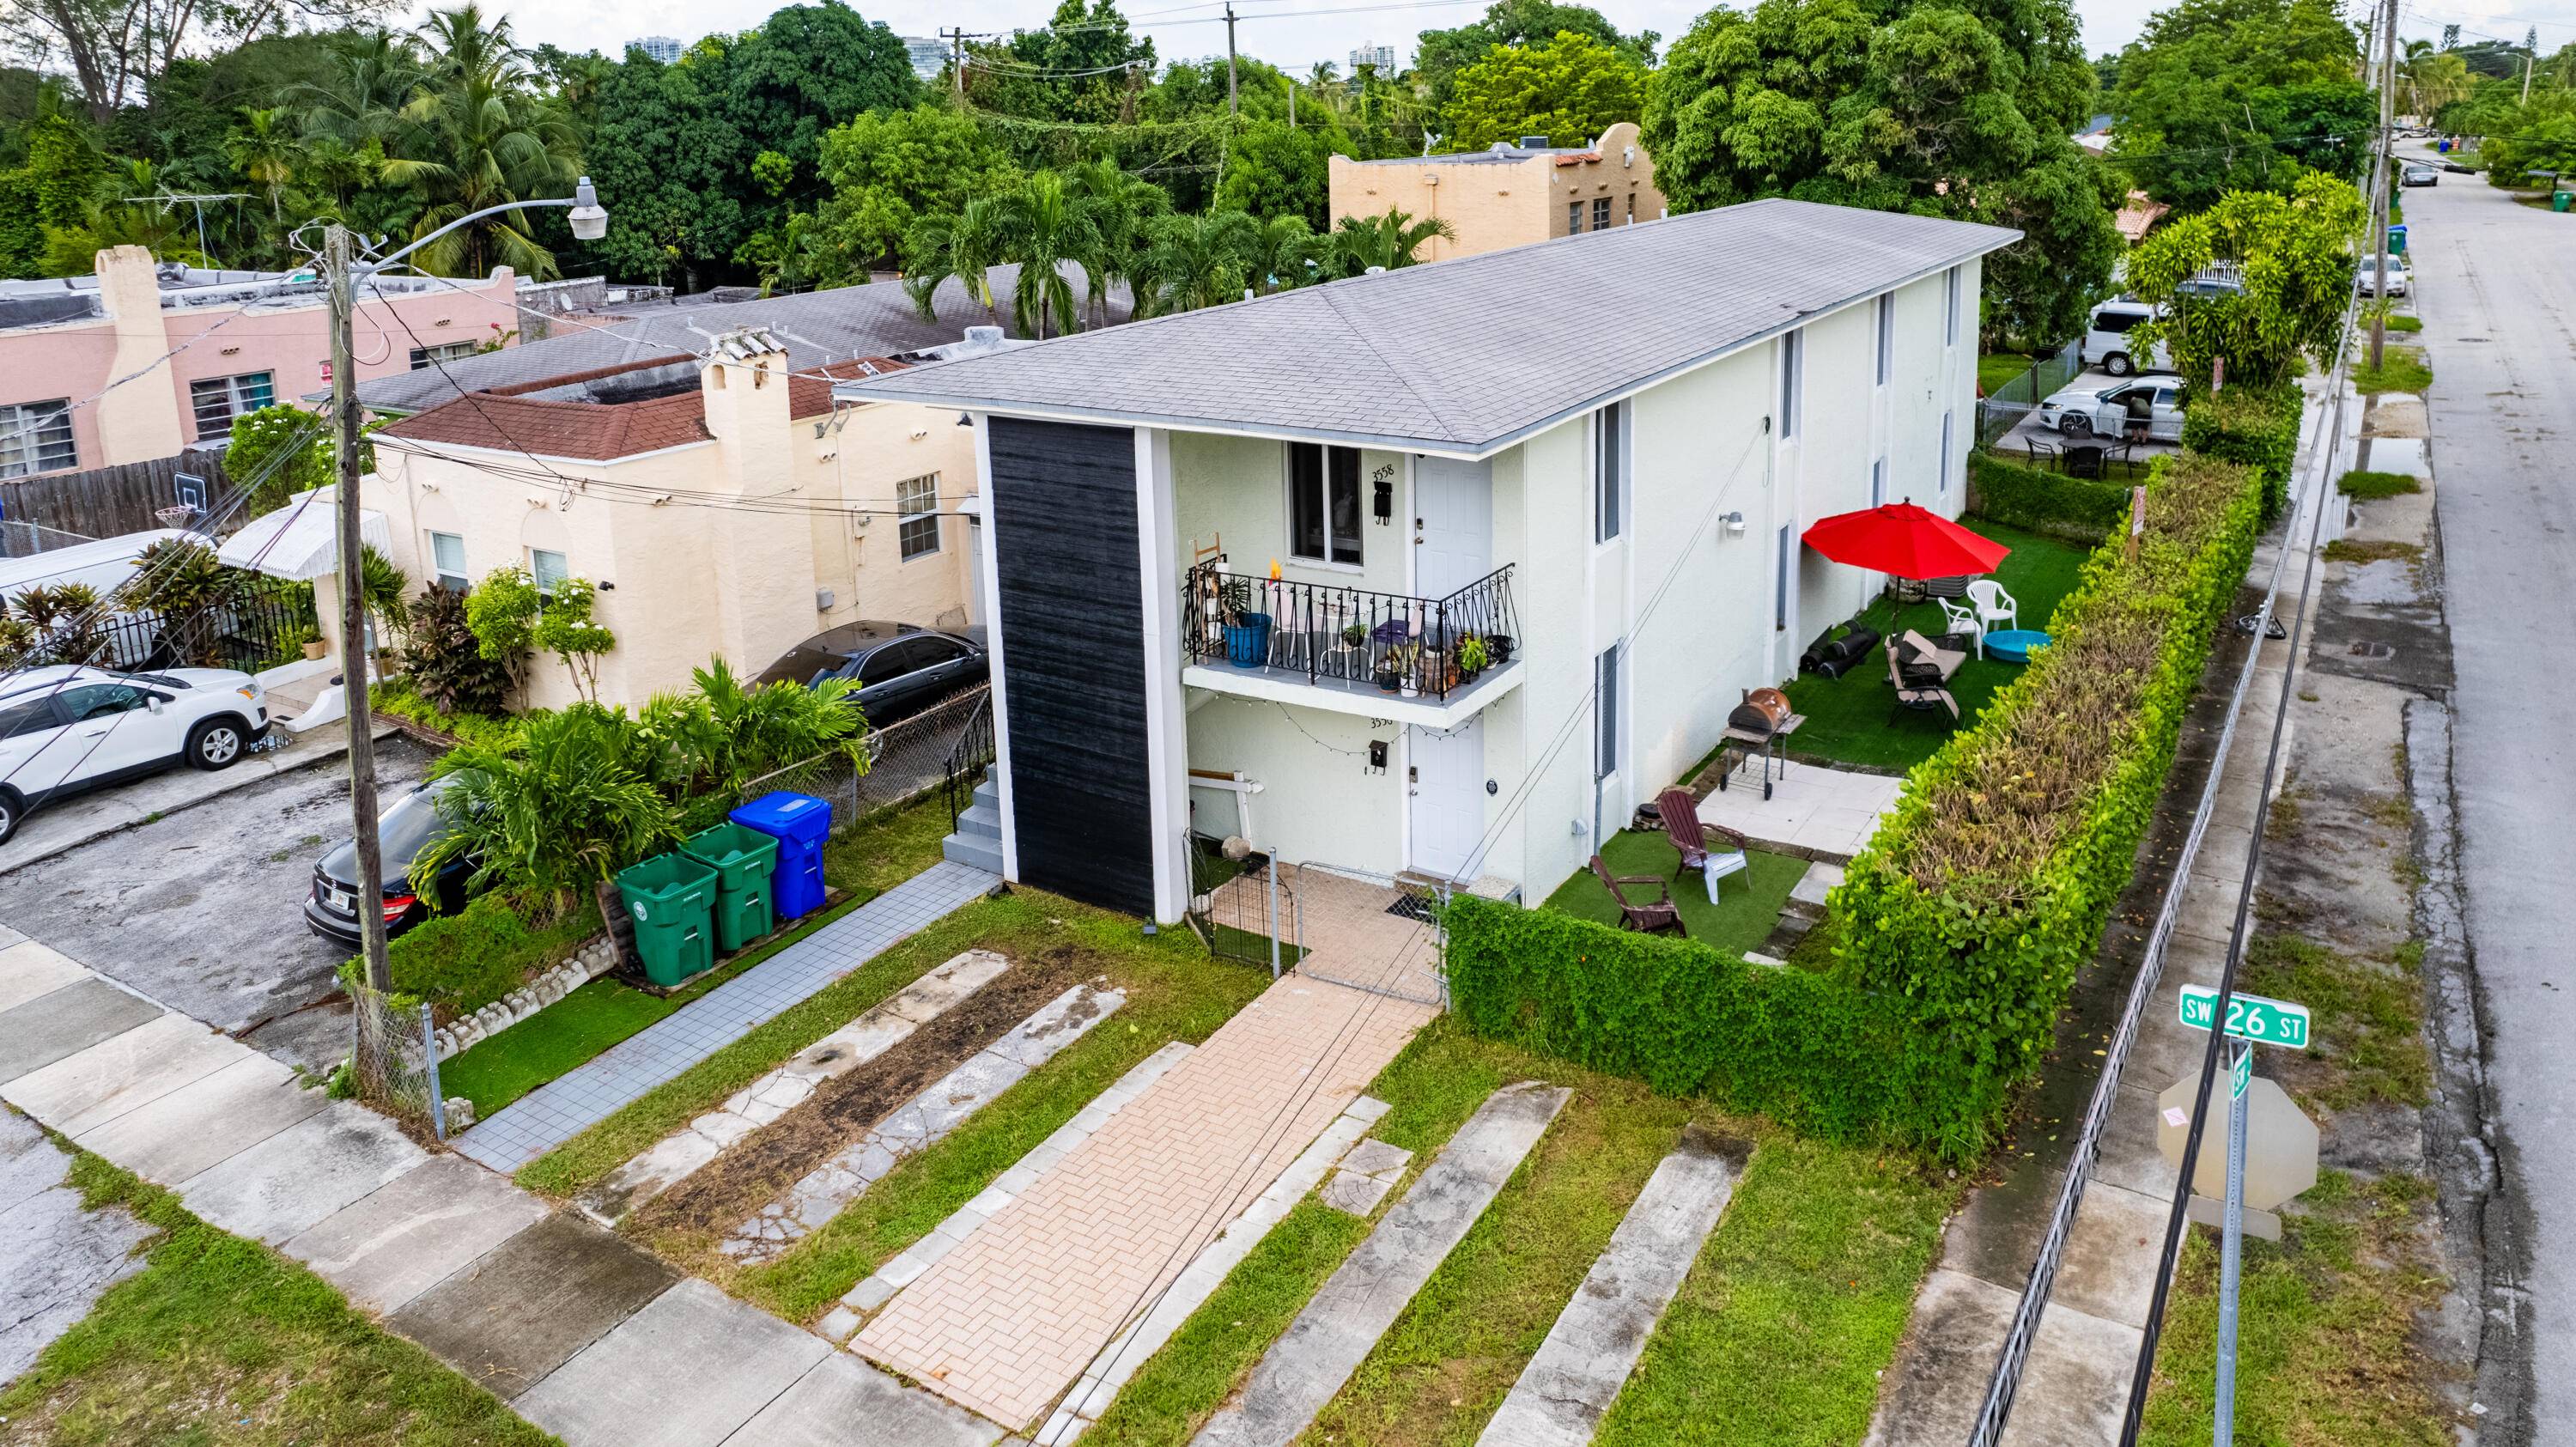 Discover Miami living in this corner lot duplex between Coral Gables and Coconut Grove.